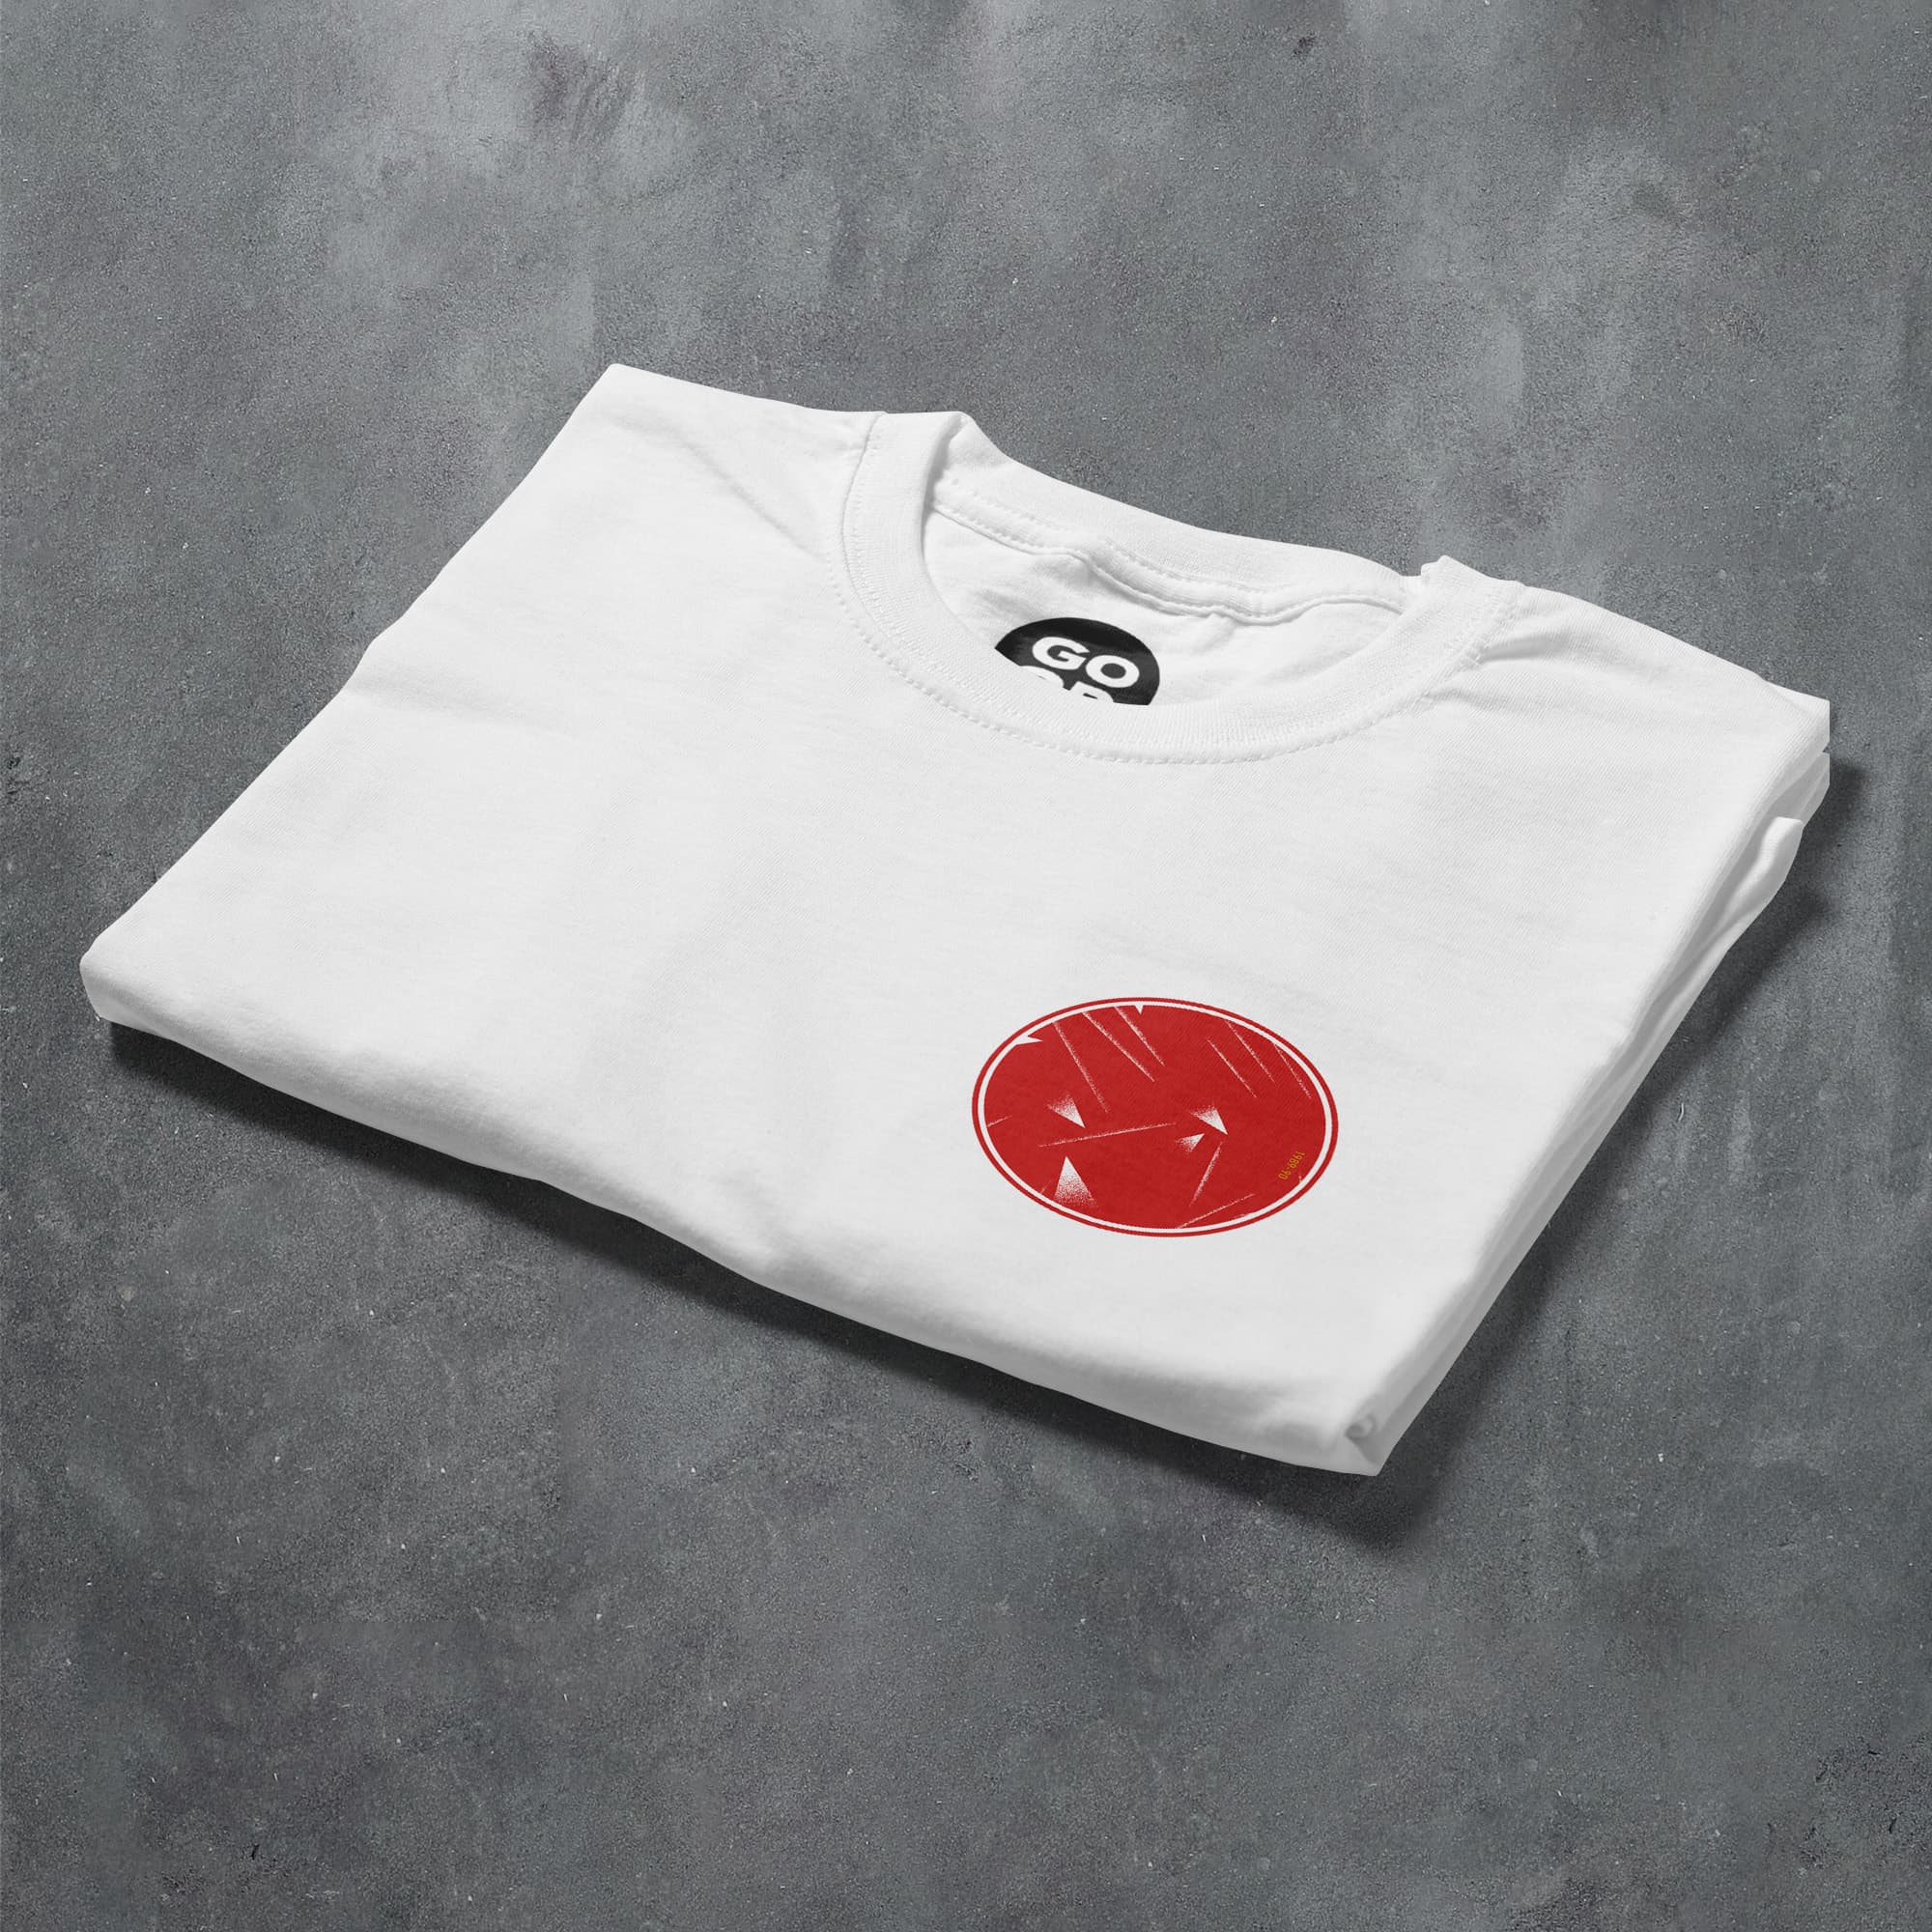 a white t - shirt with a red smiley face on it